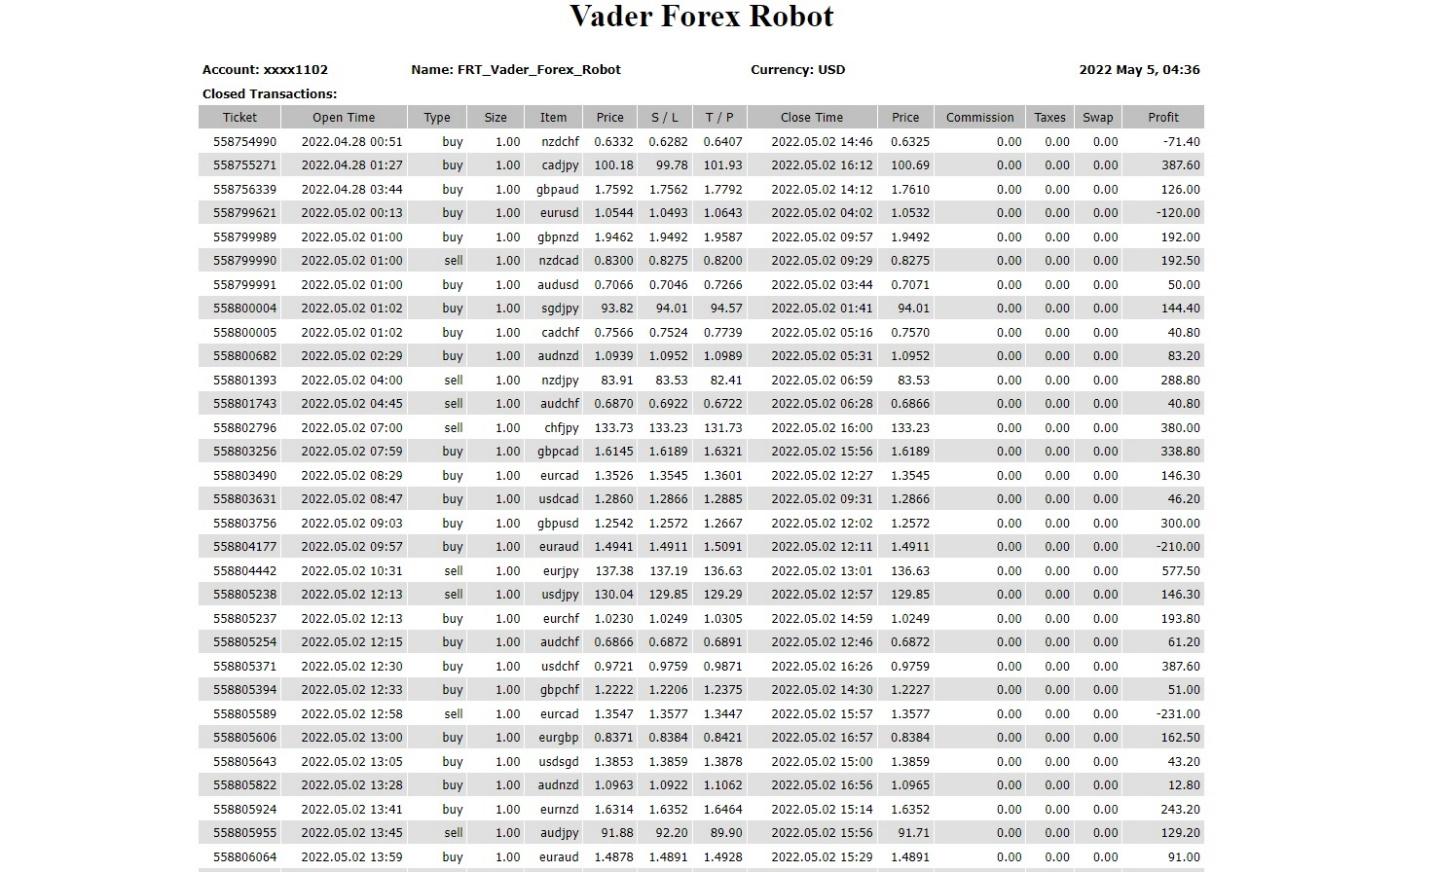 Trading results of Vader Forex Robot on the official website